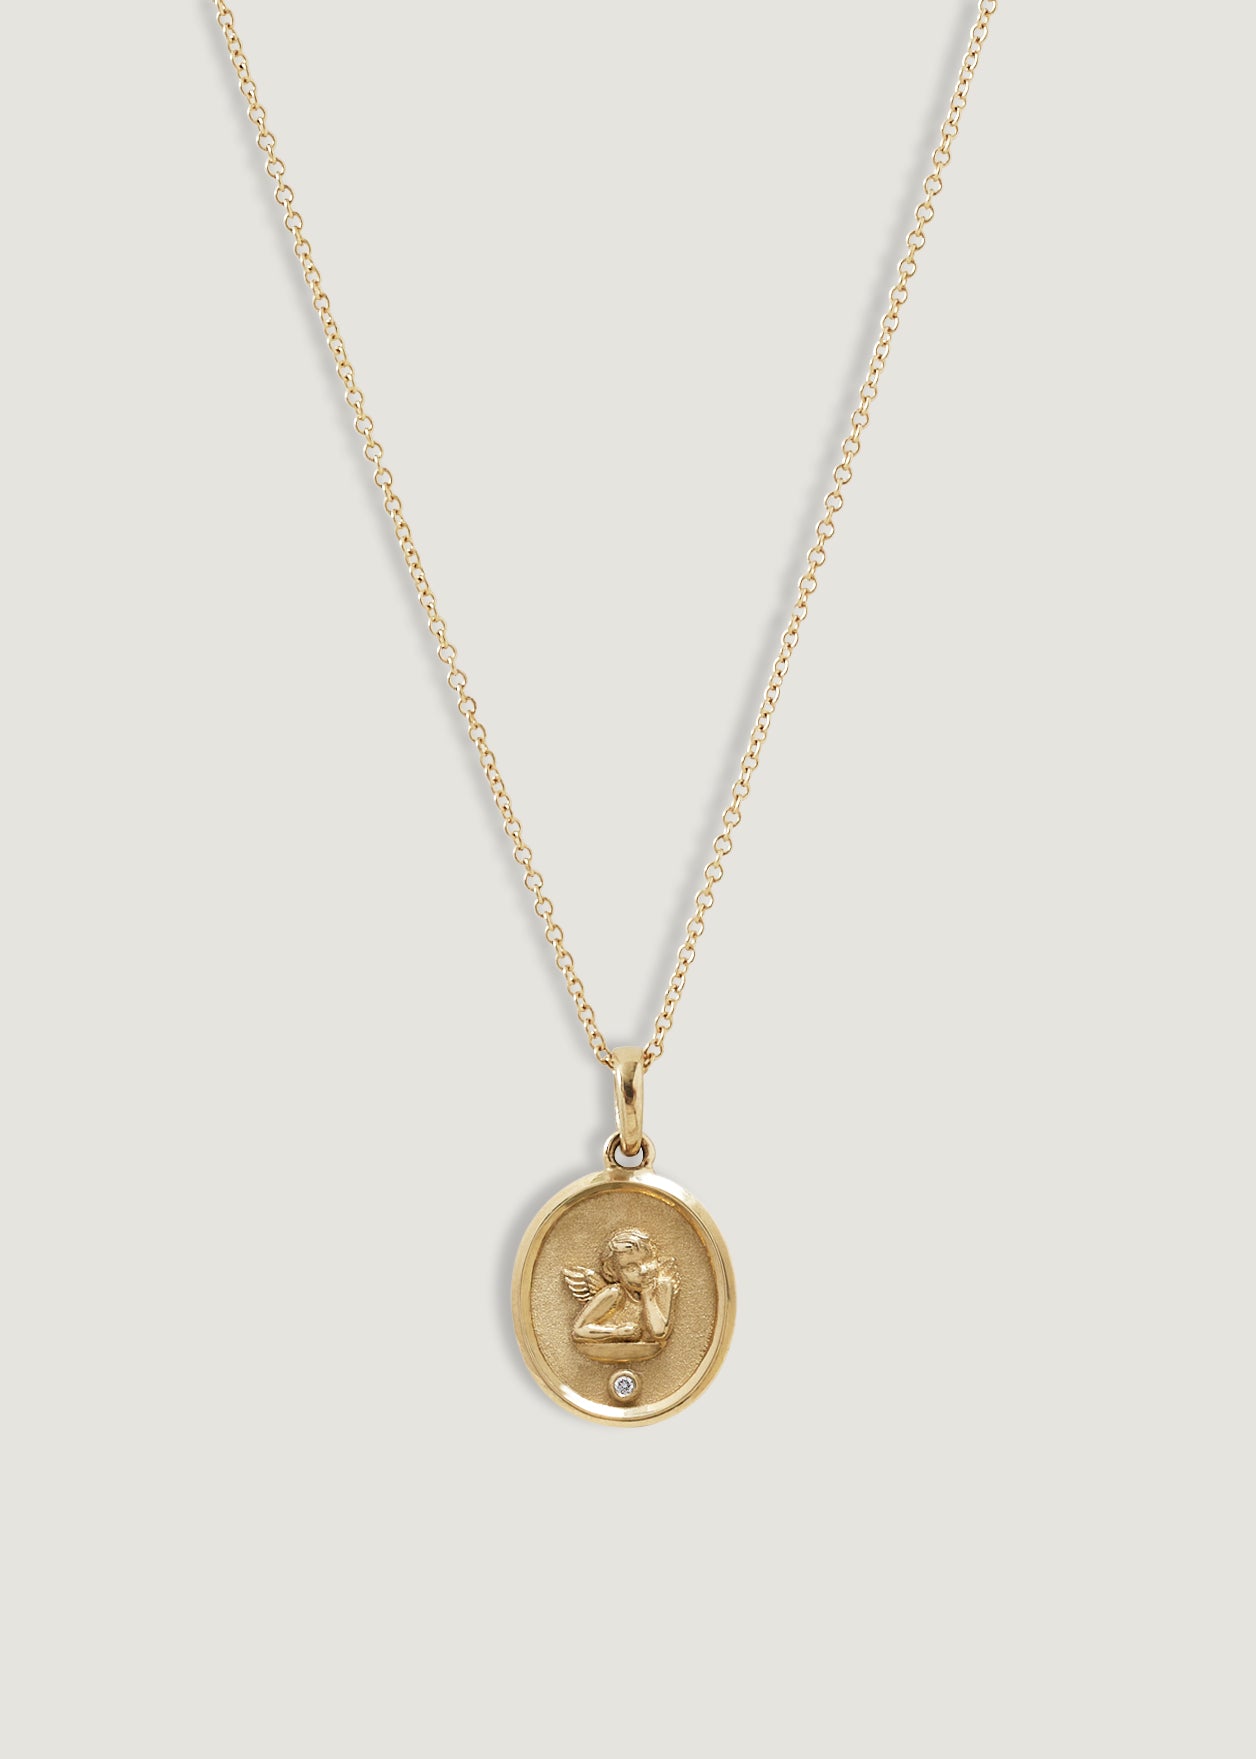 Lucky Number Charm Necklace 14K Gold - Kinn 18 / 7